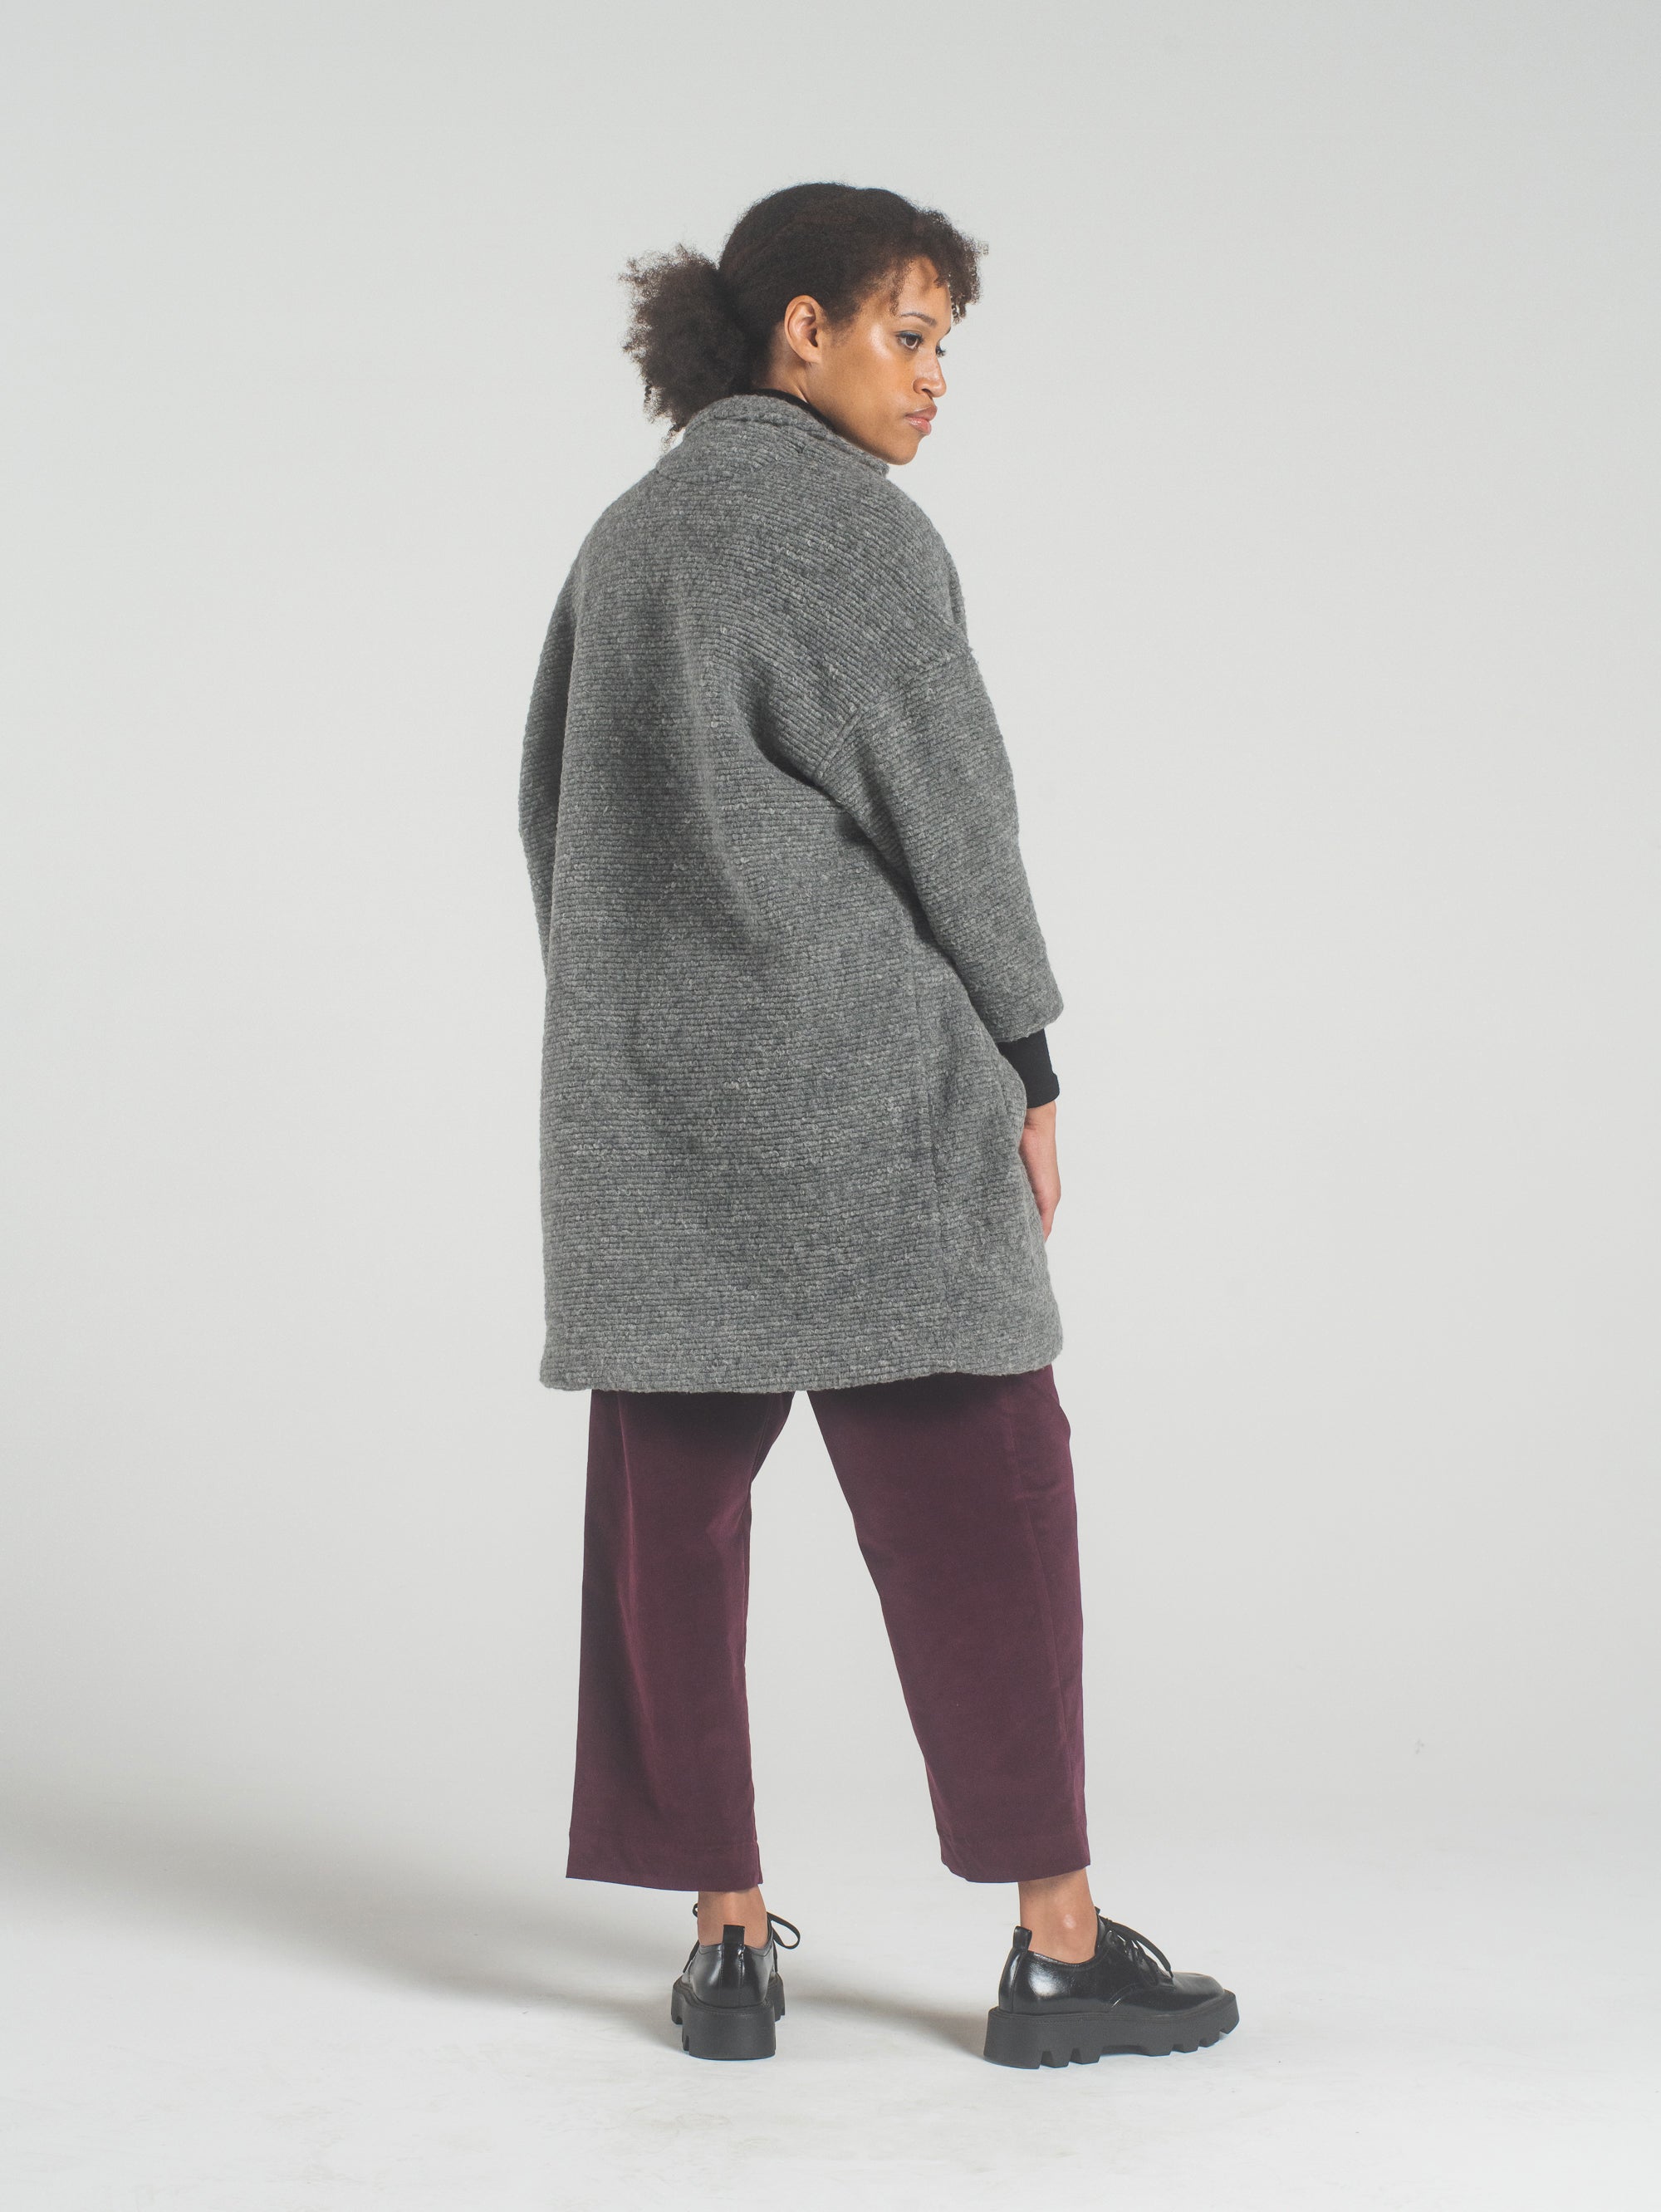 SAMPLE SALE - Anais Jacket in Heather Wool - SMALL